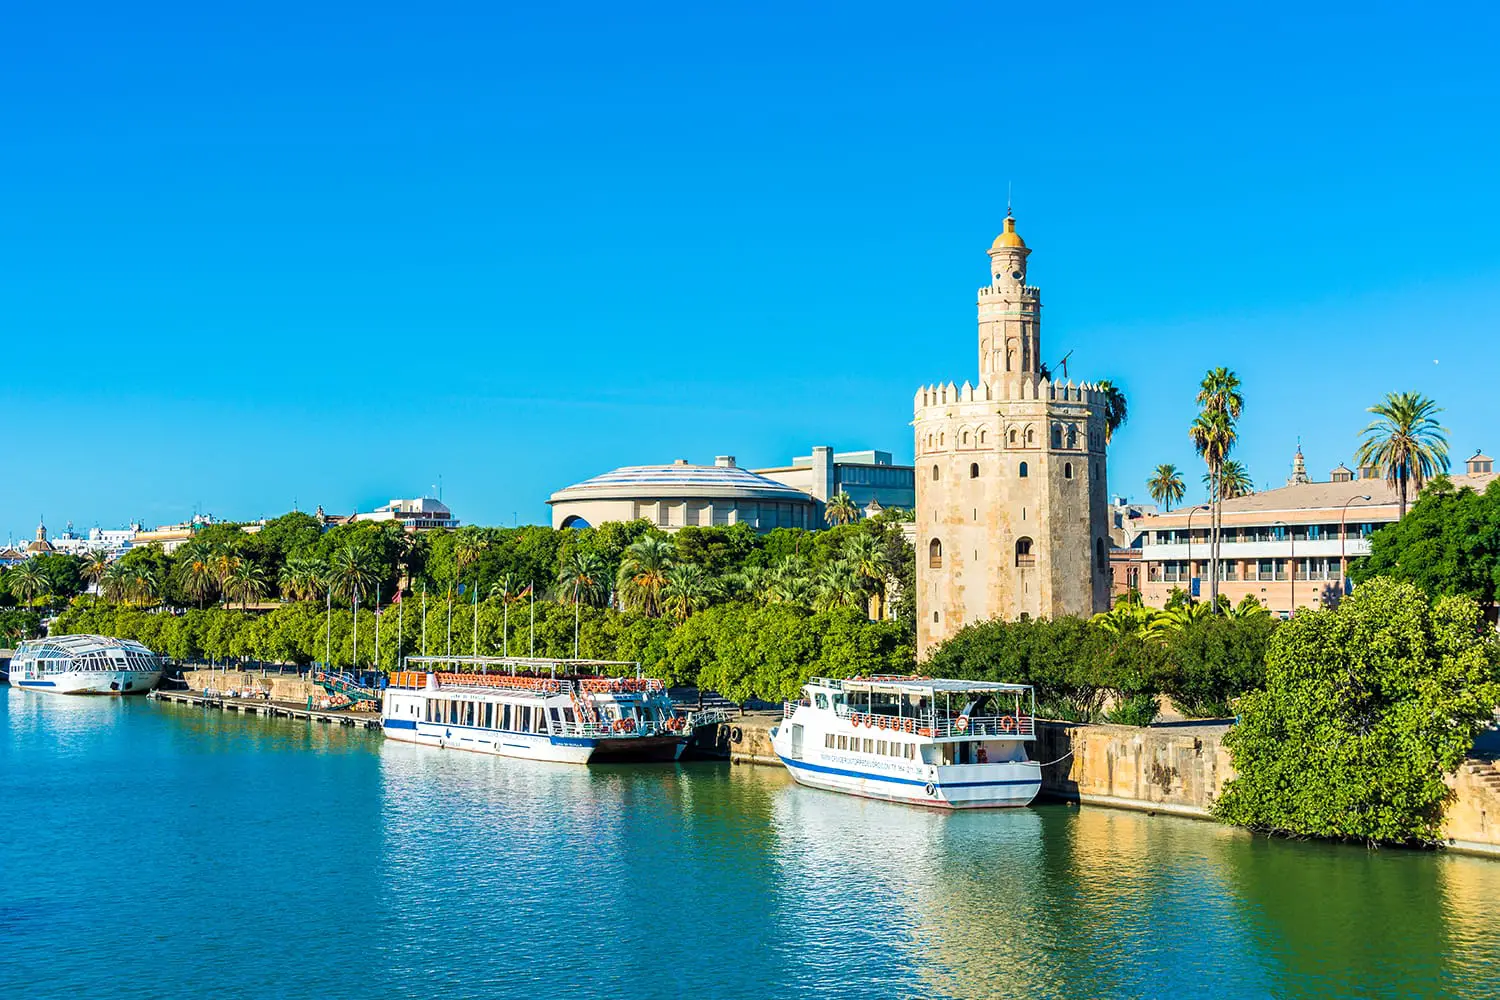 The Torre del Oro in Seville is an albarrana tower located on the left bank of the Guadalquivir River. It houses the Naval Museum of Seville, Spain